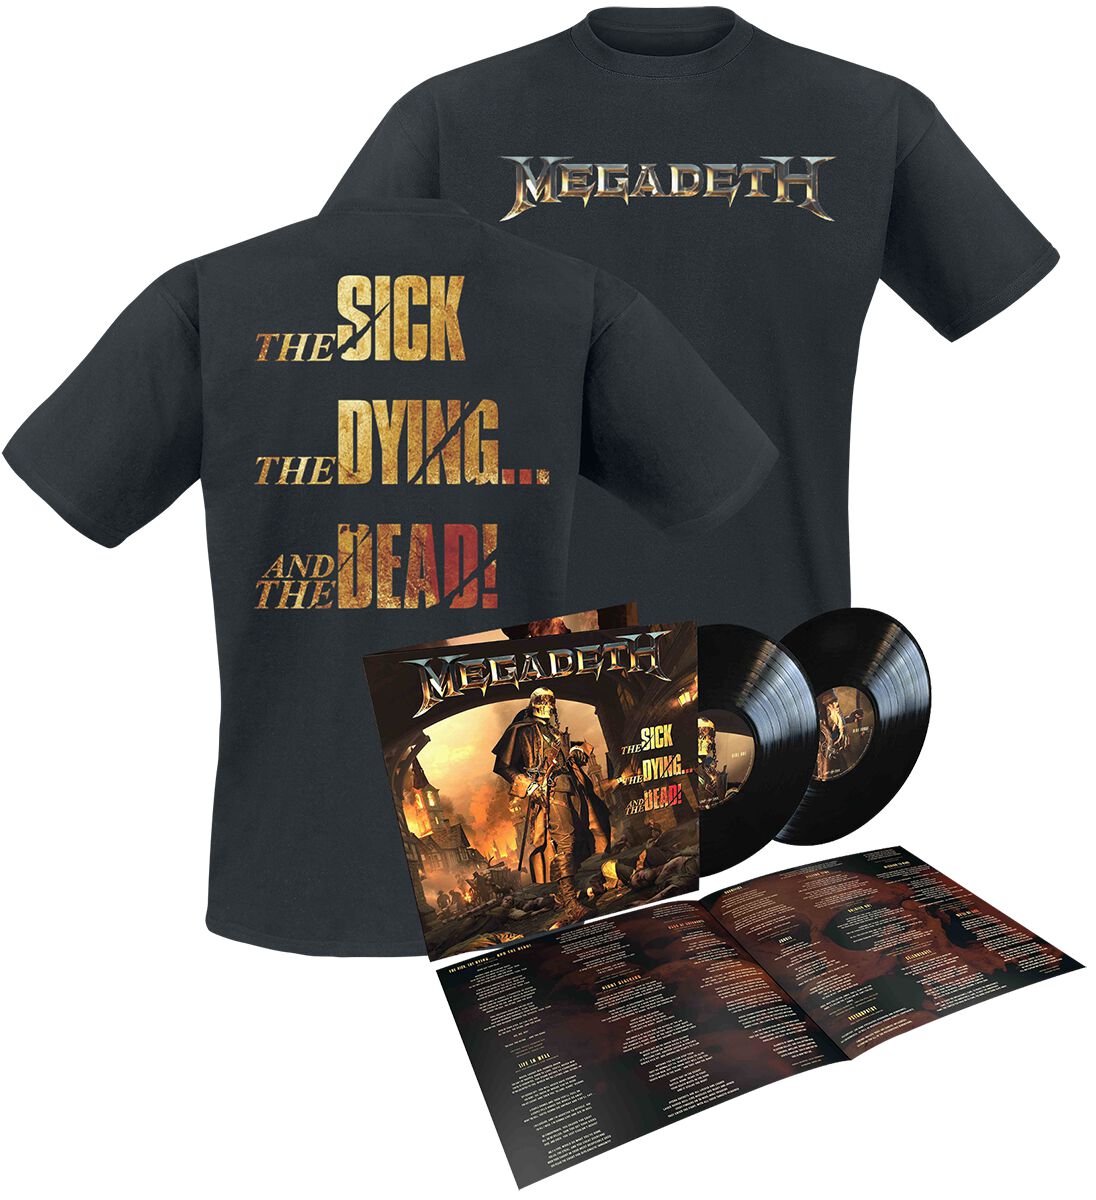 Megadeth The sick, the dying... and the dead! LP multicolor von Megadeth